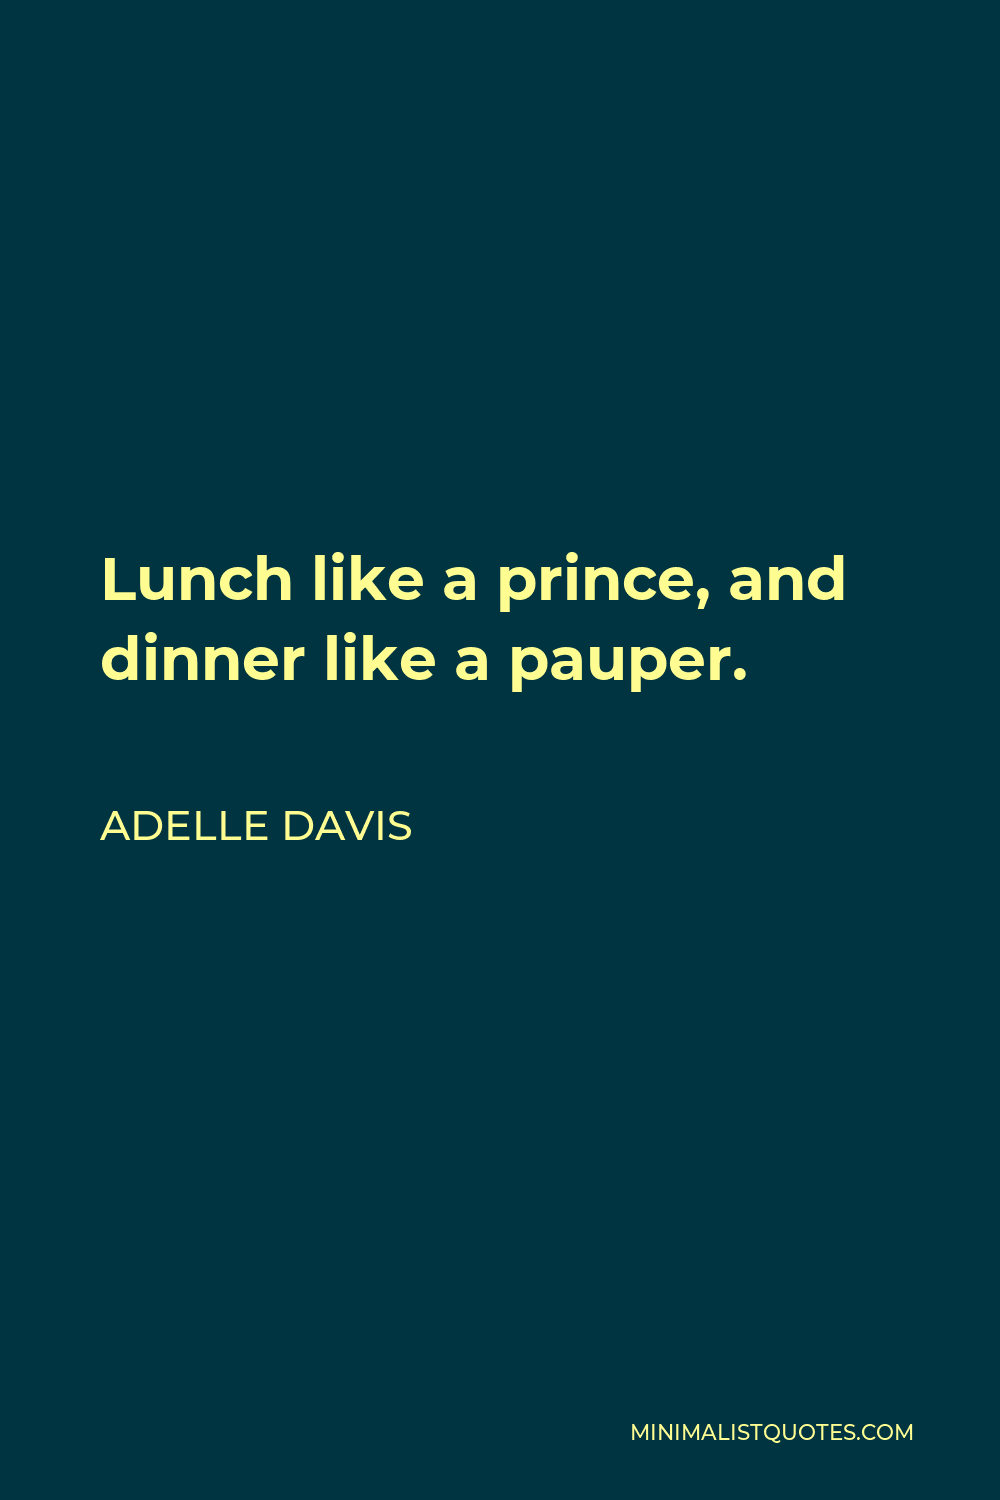 Adelle Davis Quote - Lunch like a prince, and dinner like a pauper.